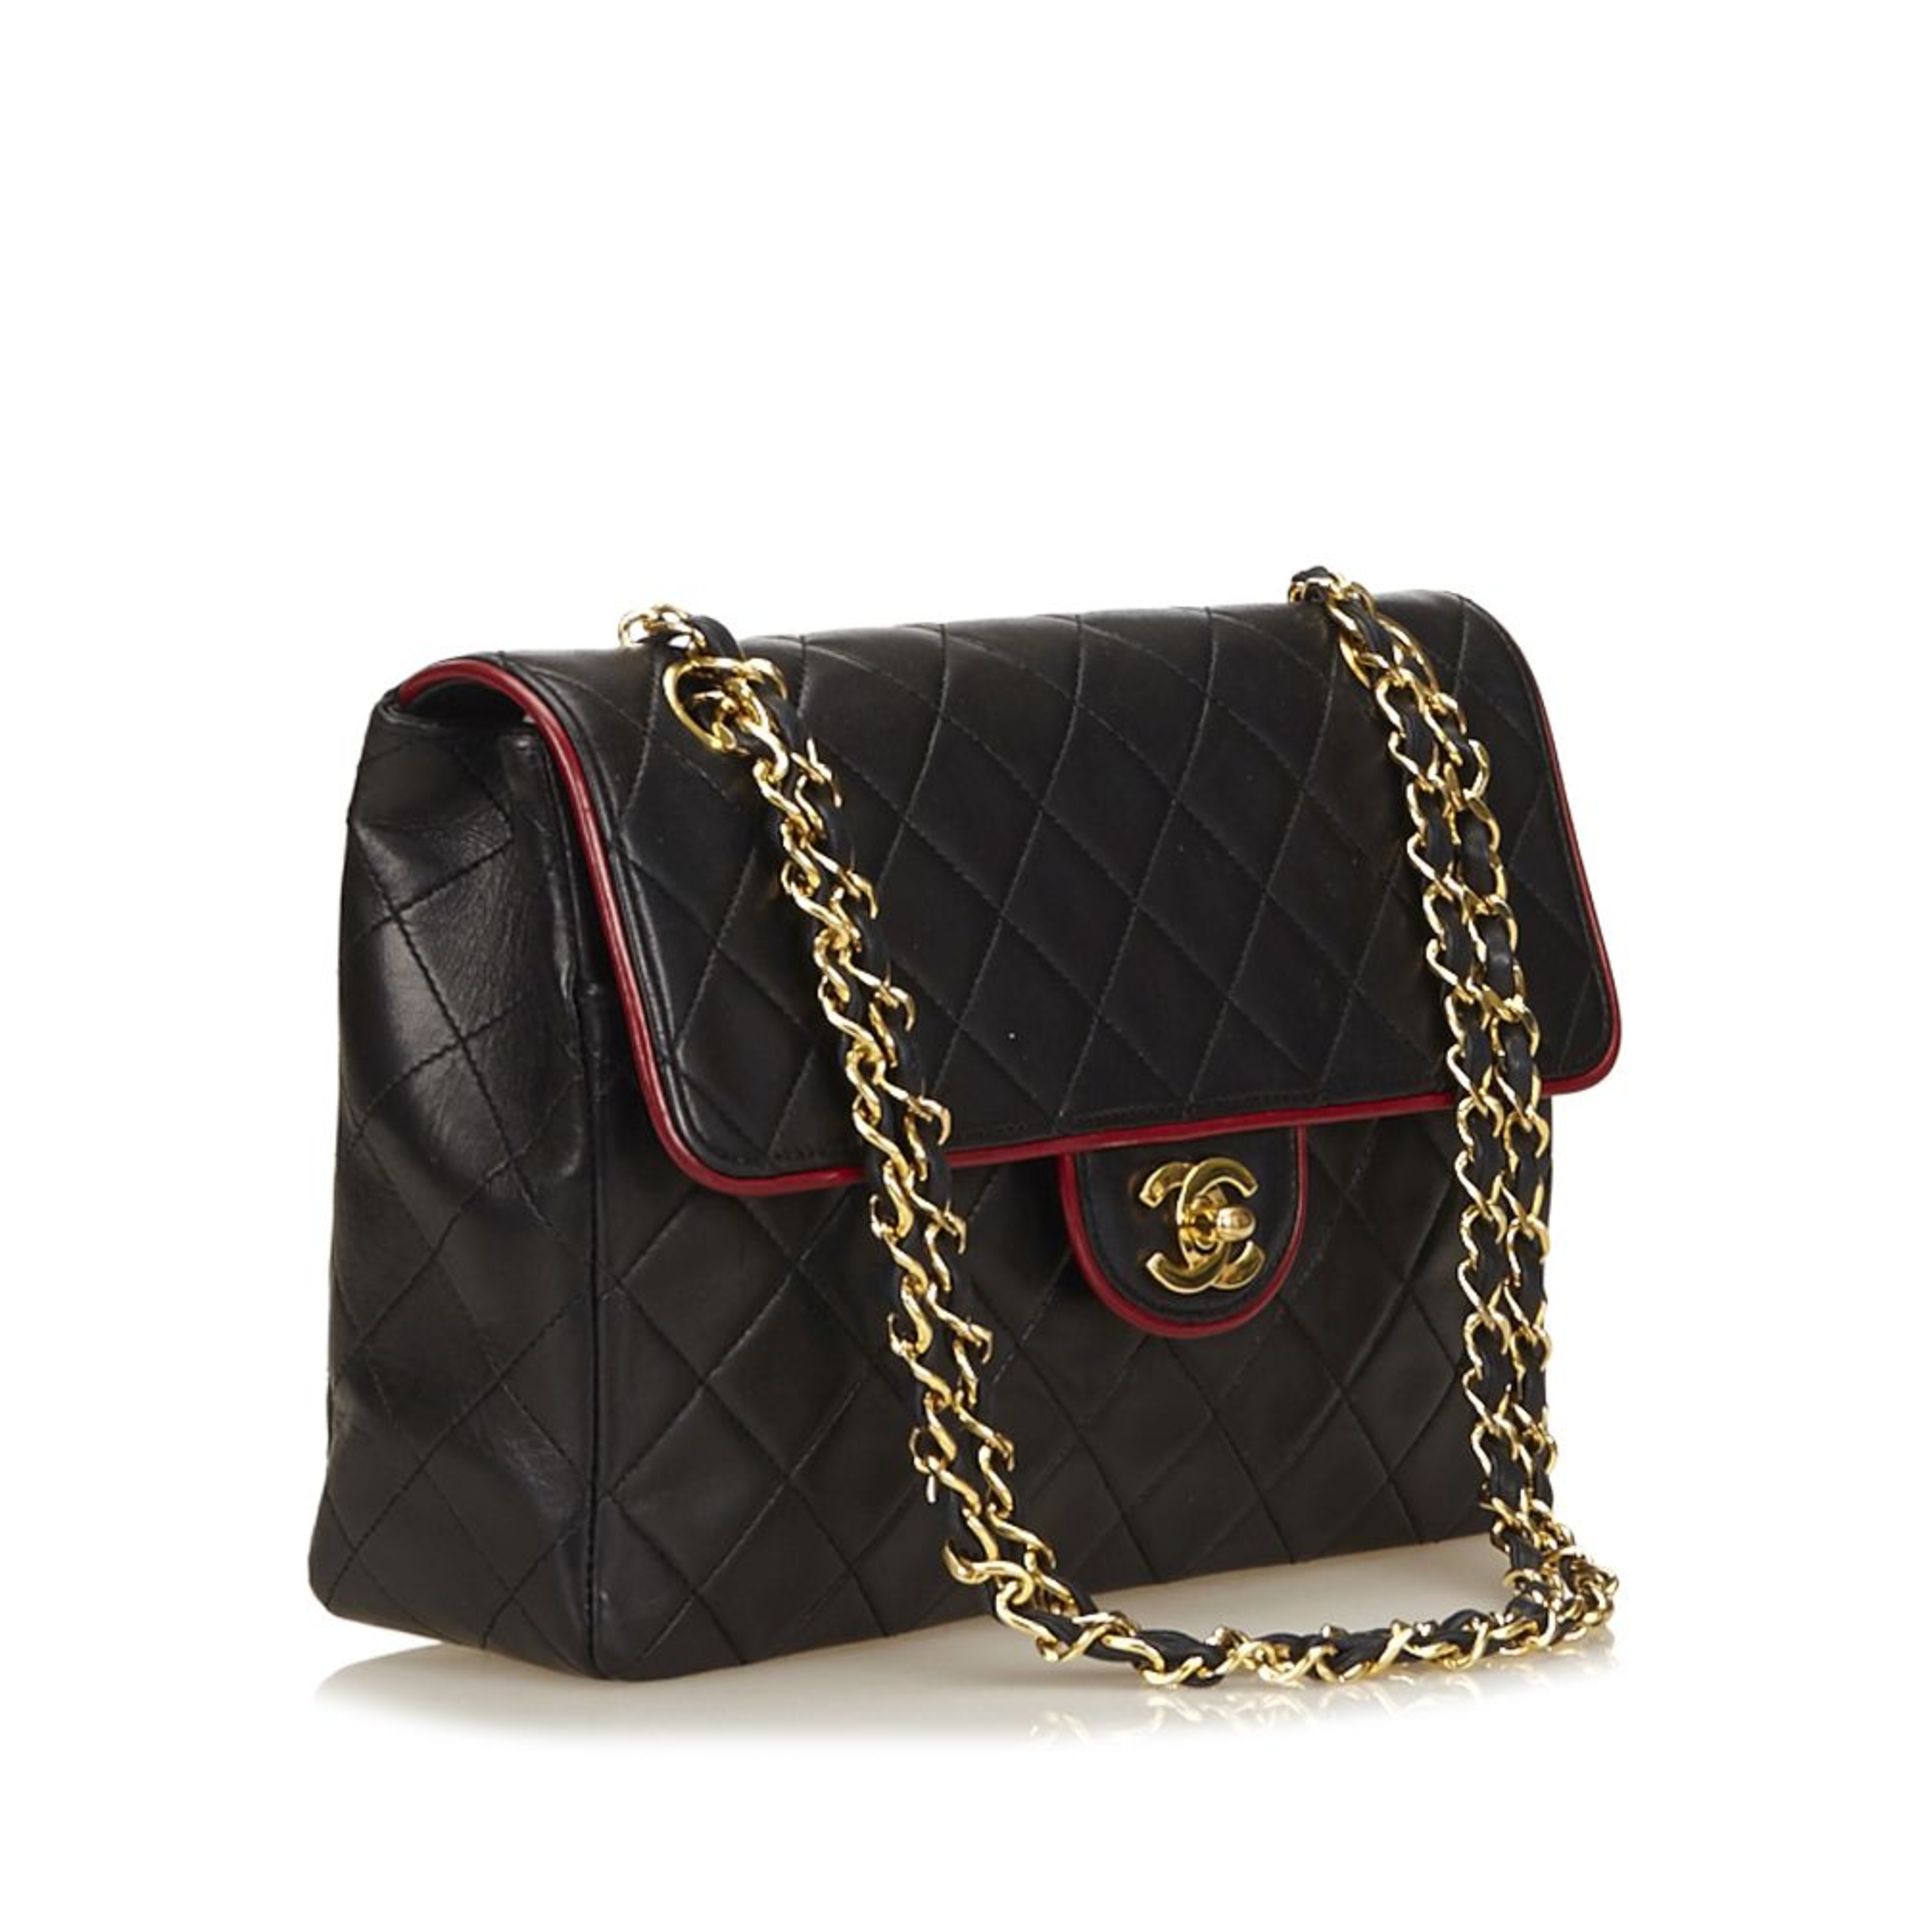 A Chanel quilted leather flap bag,featuring a quilted leather body, a gold-tone shoulder chain, - Bild 2 aus 3